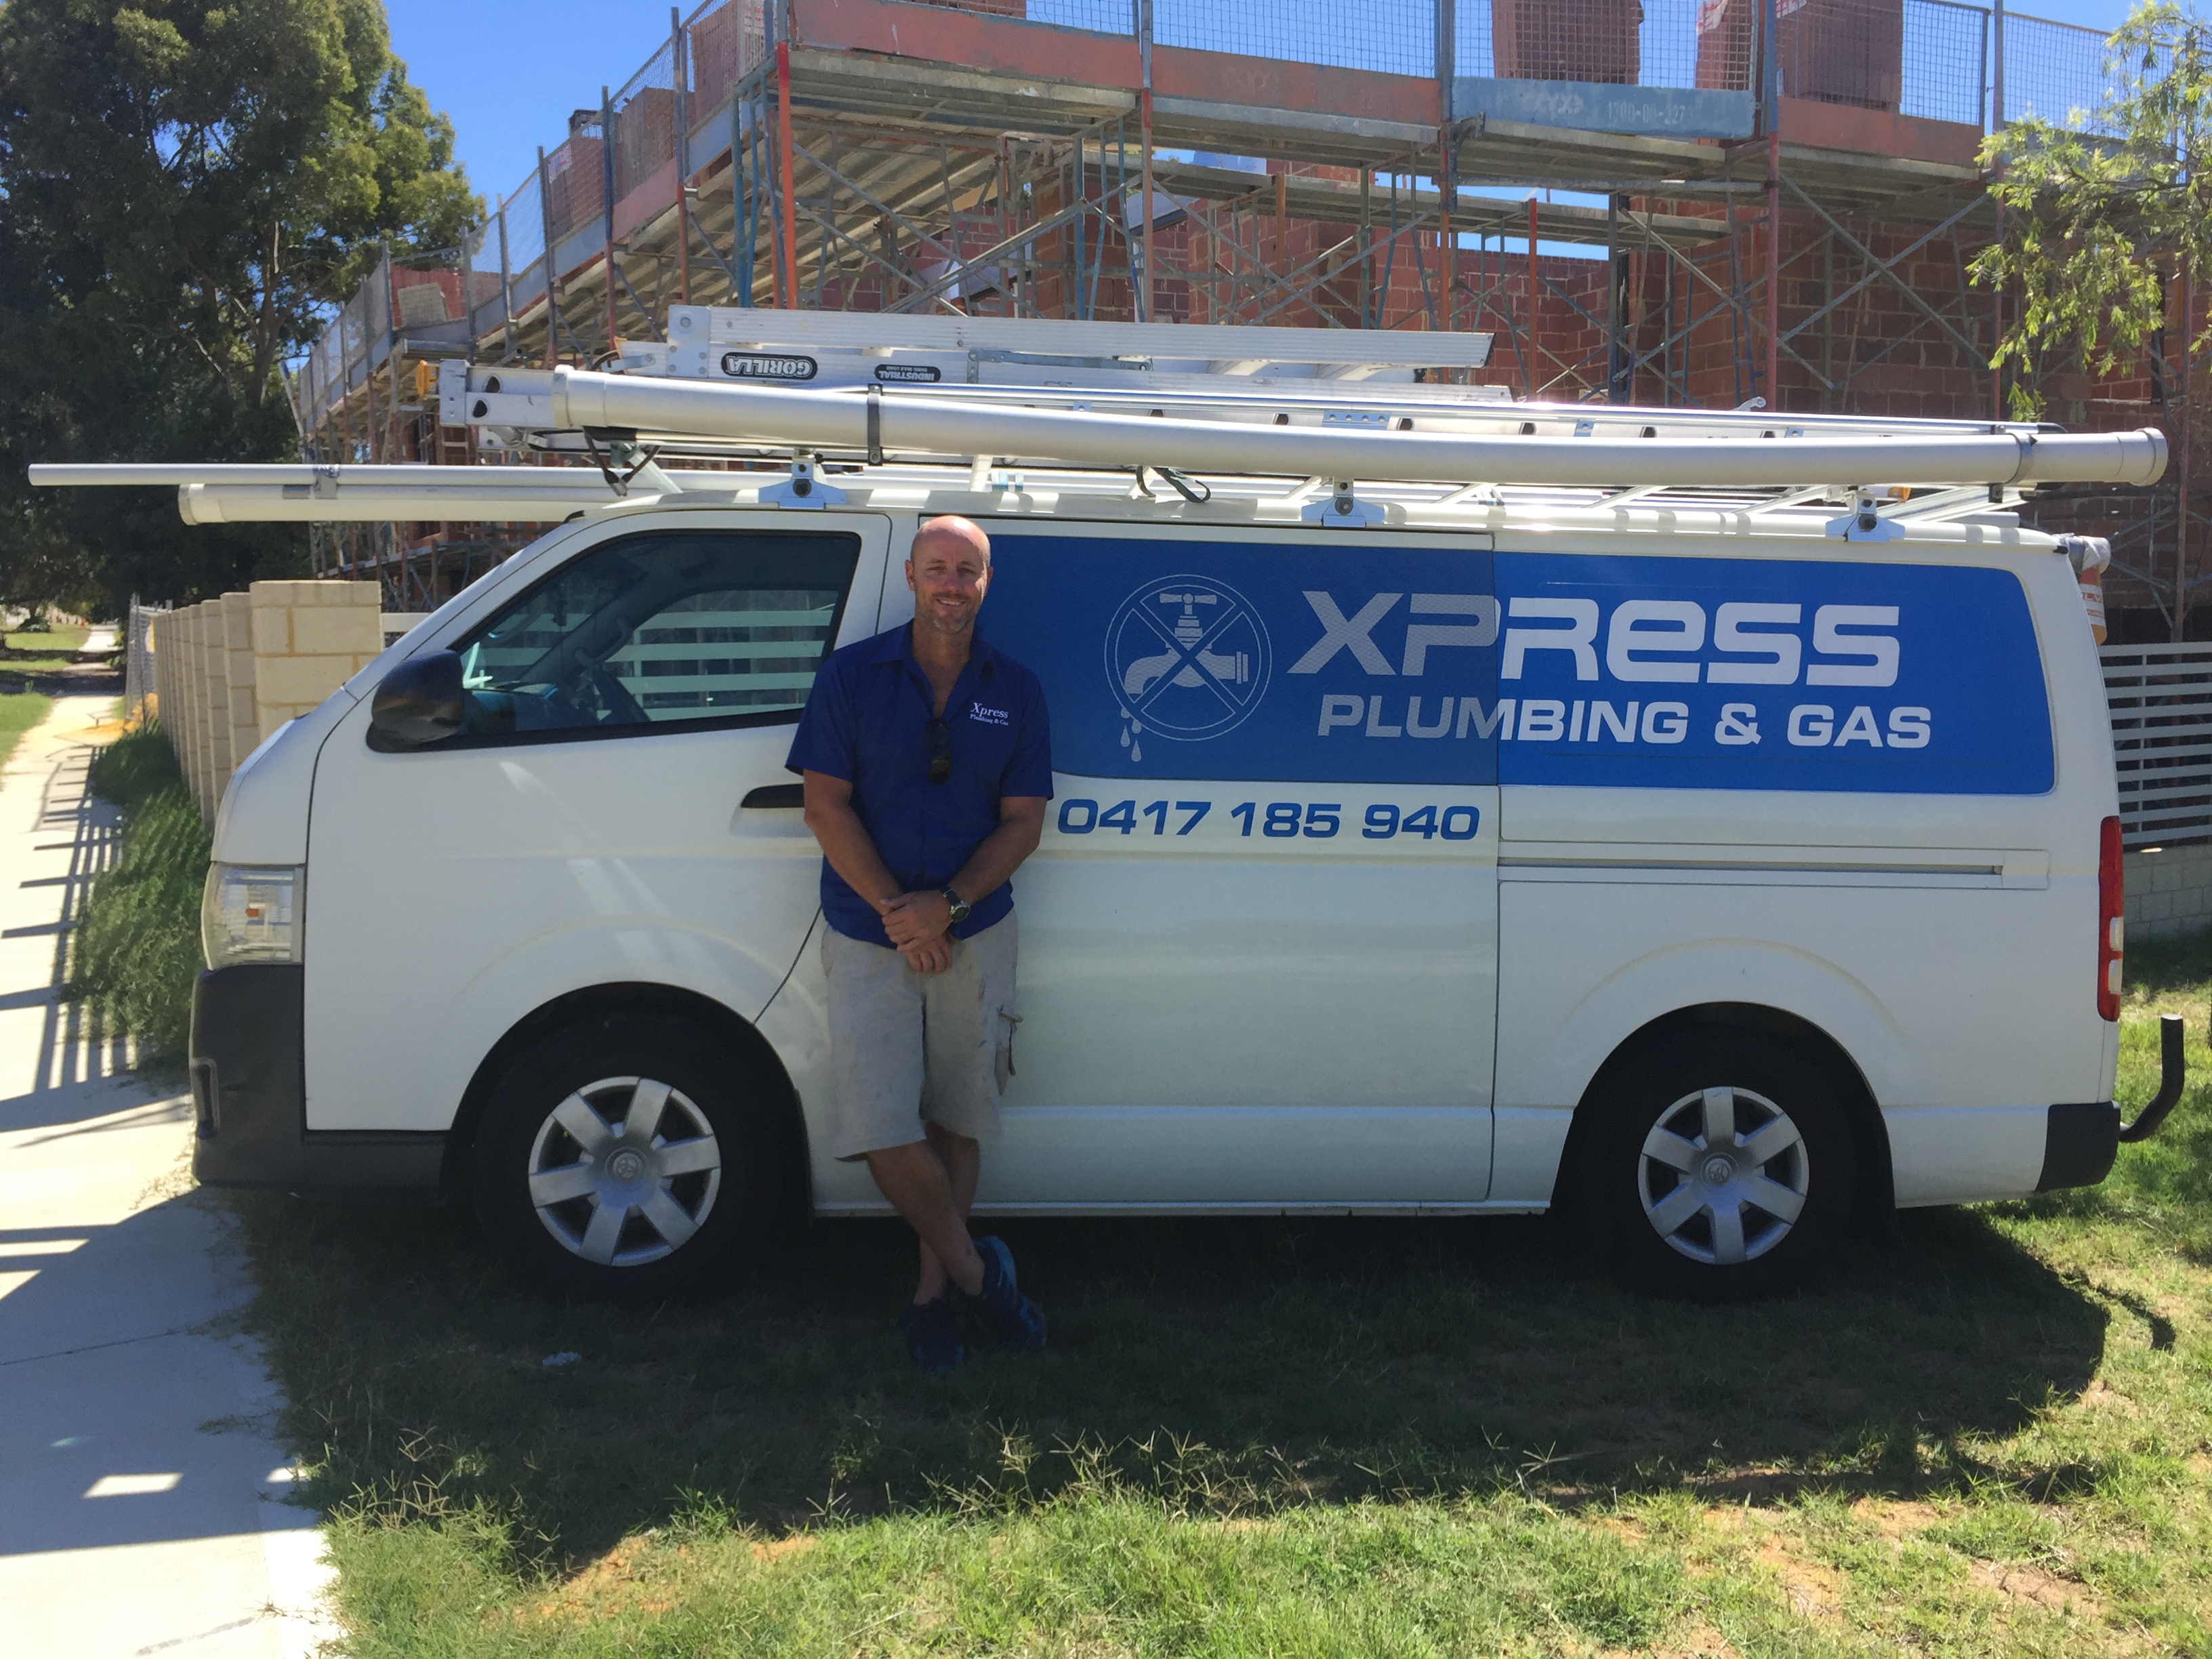 Xpress plumbing and gas